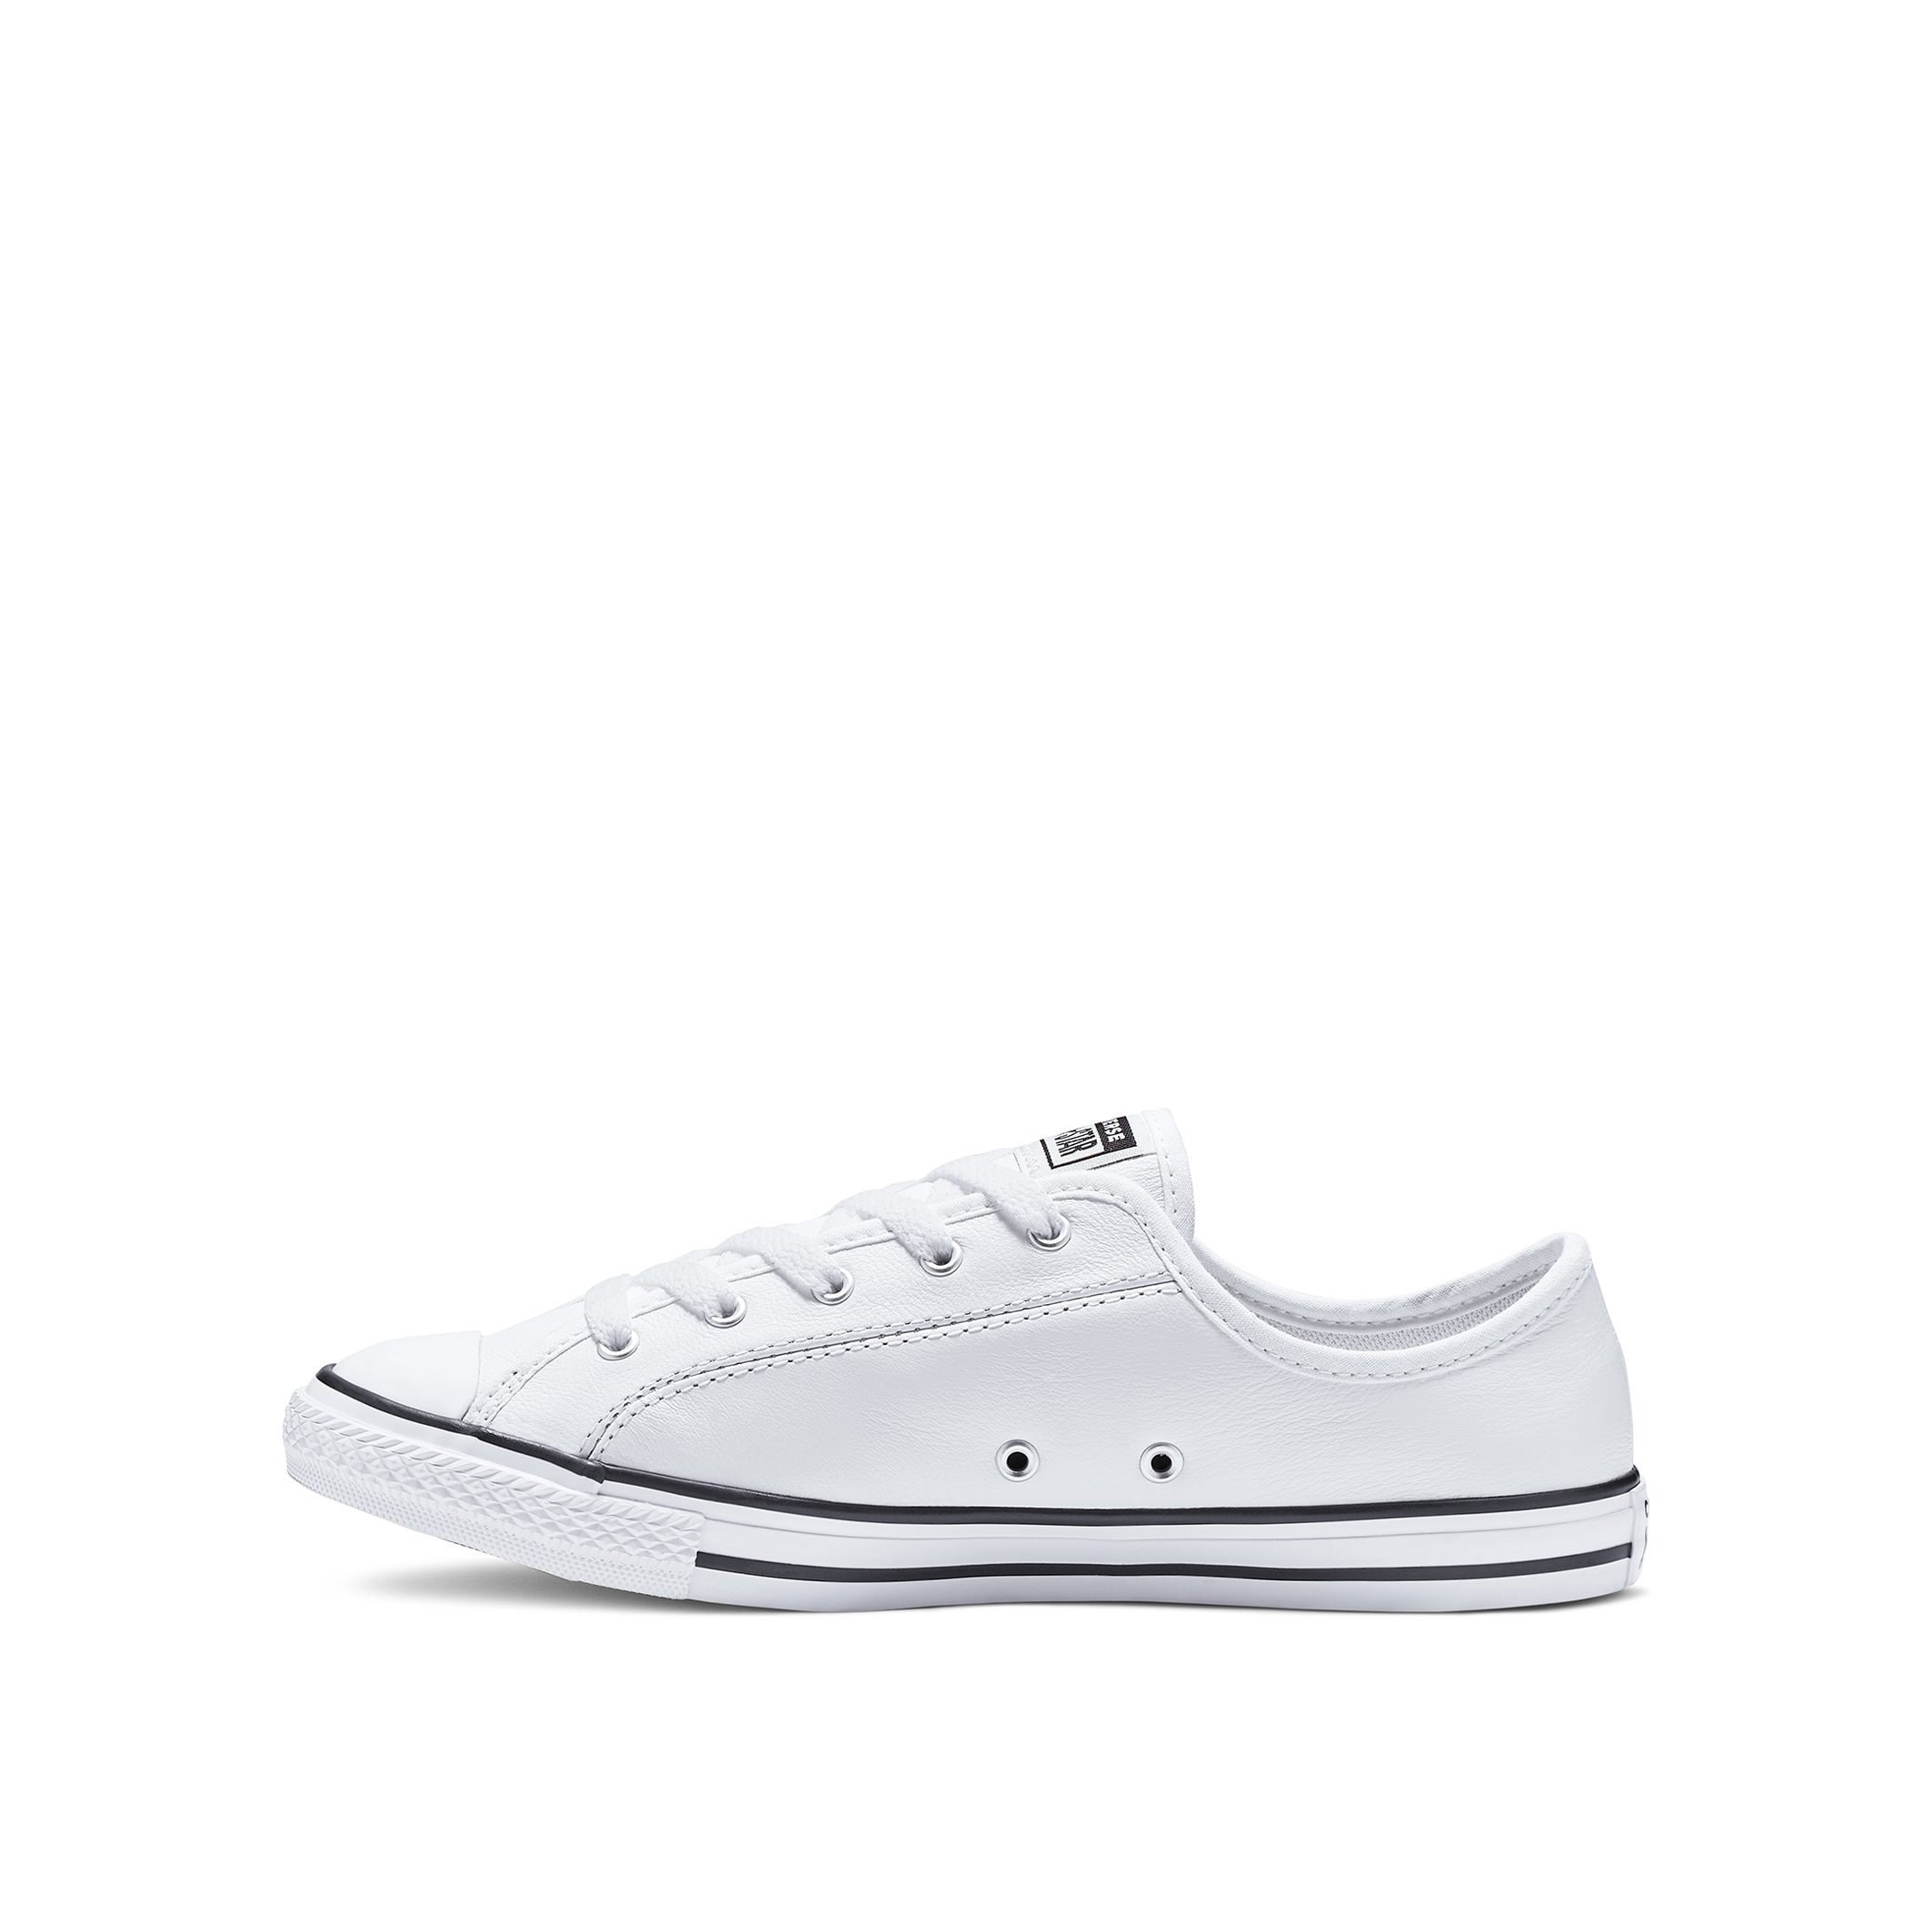 converse dainty mid white leather